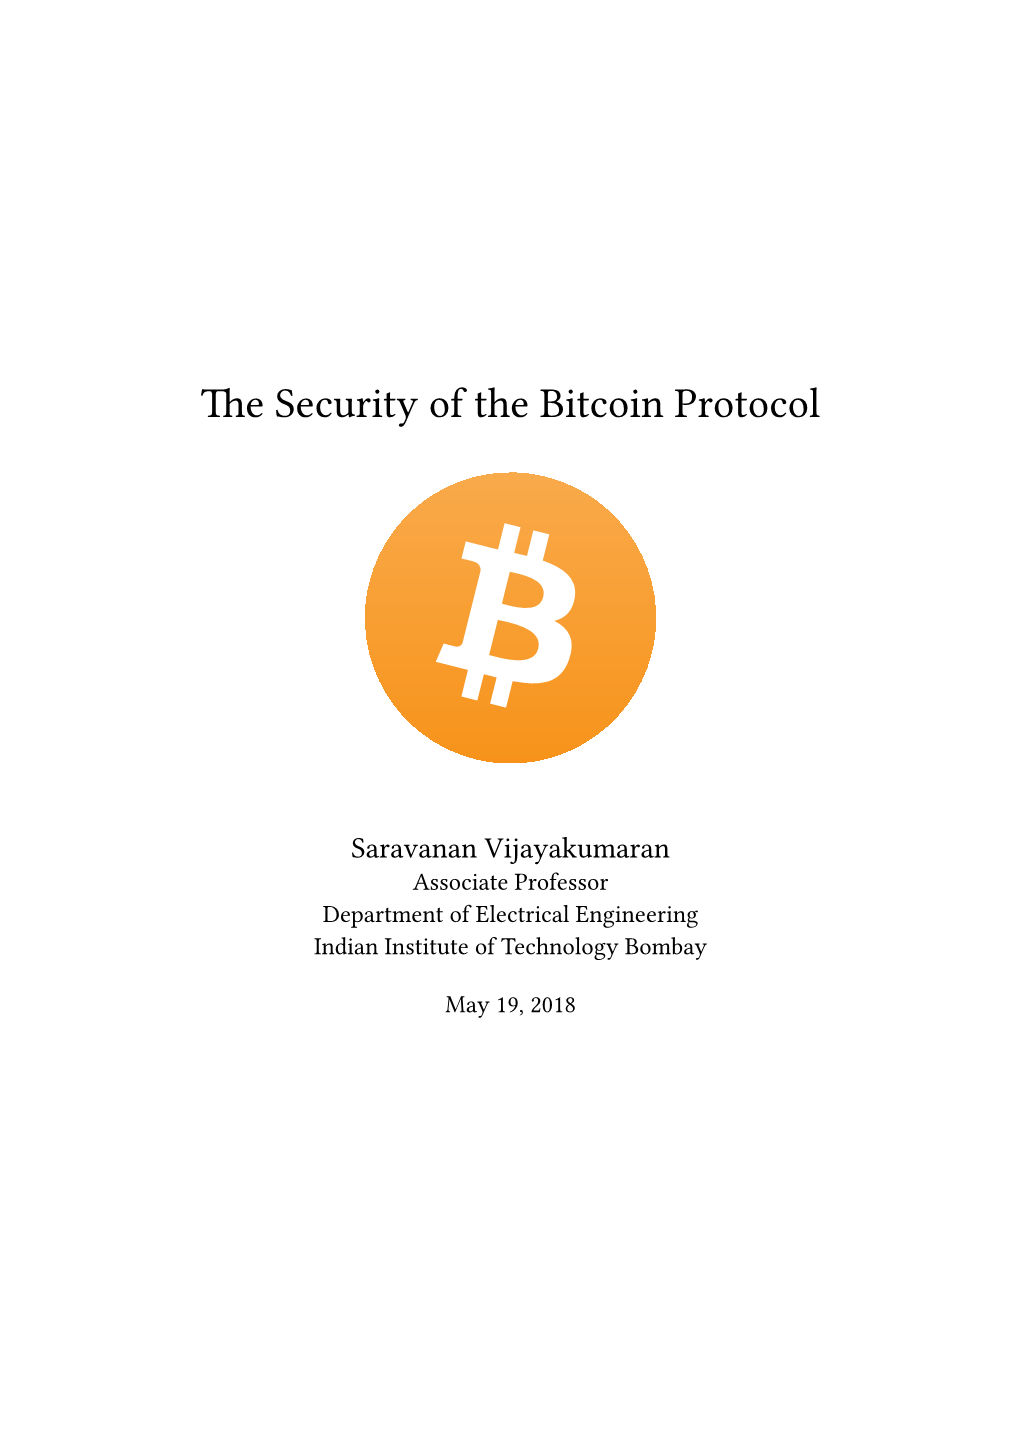 The Security of the Bitcoin Protocol